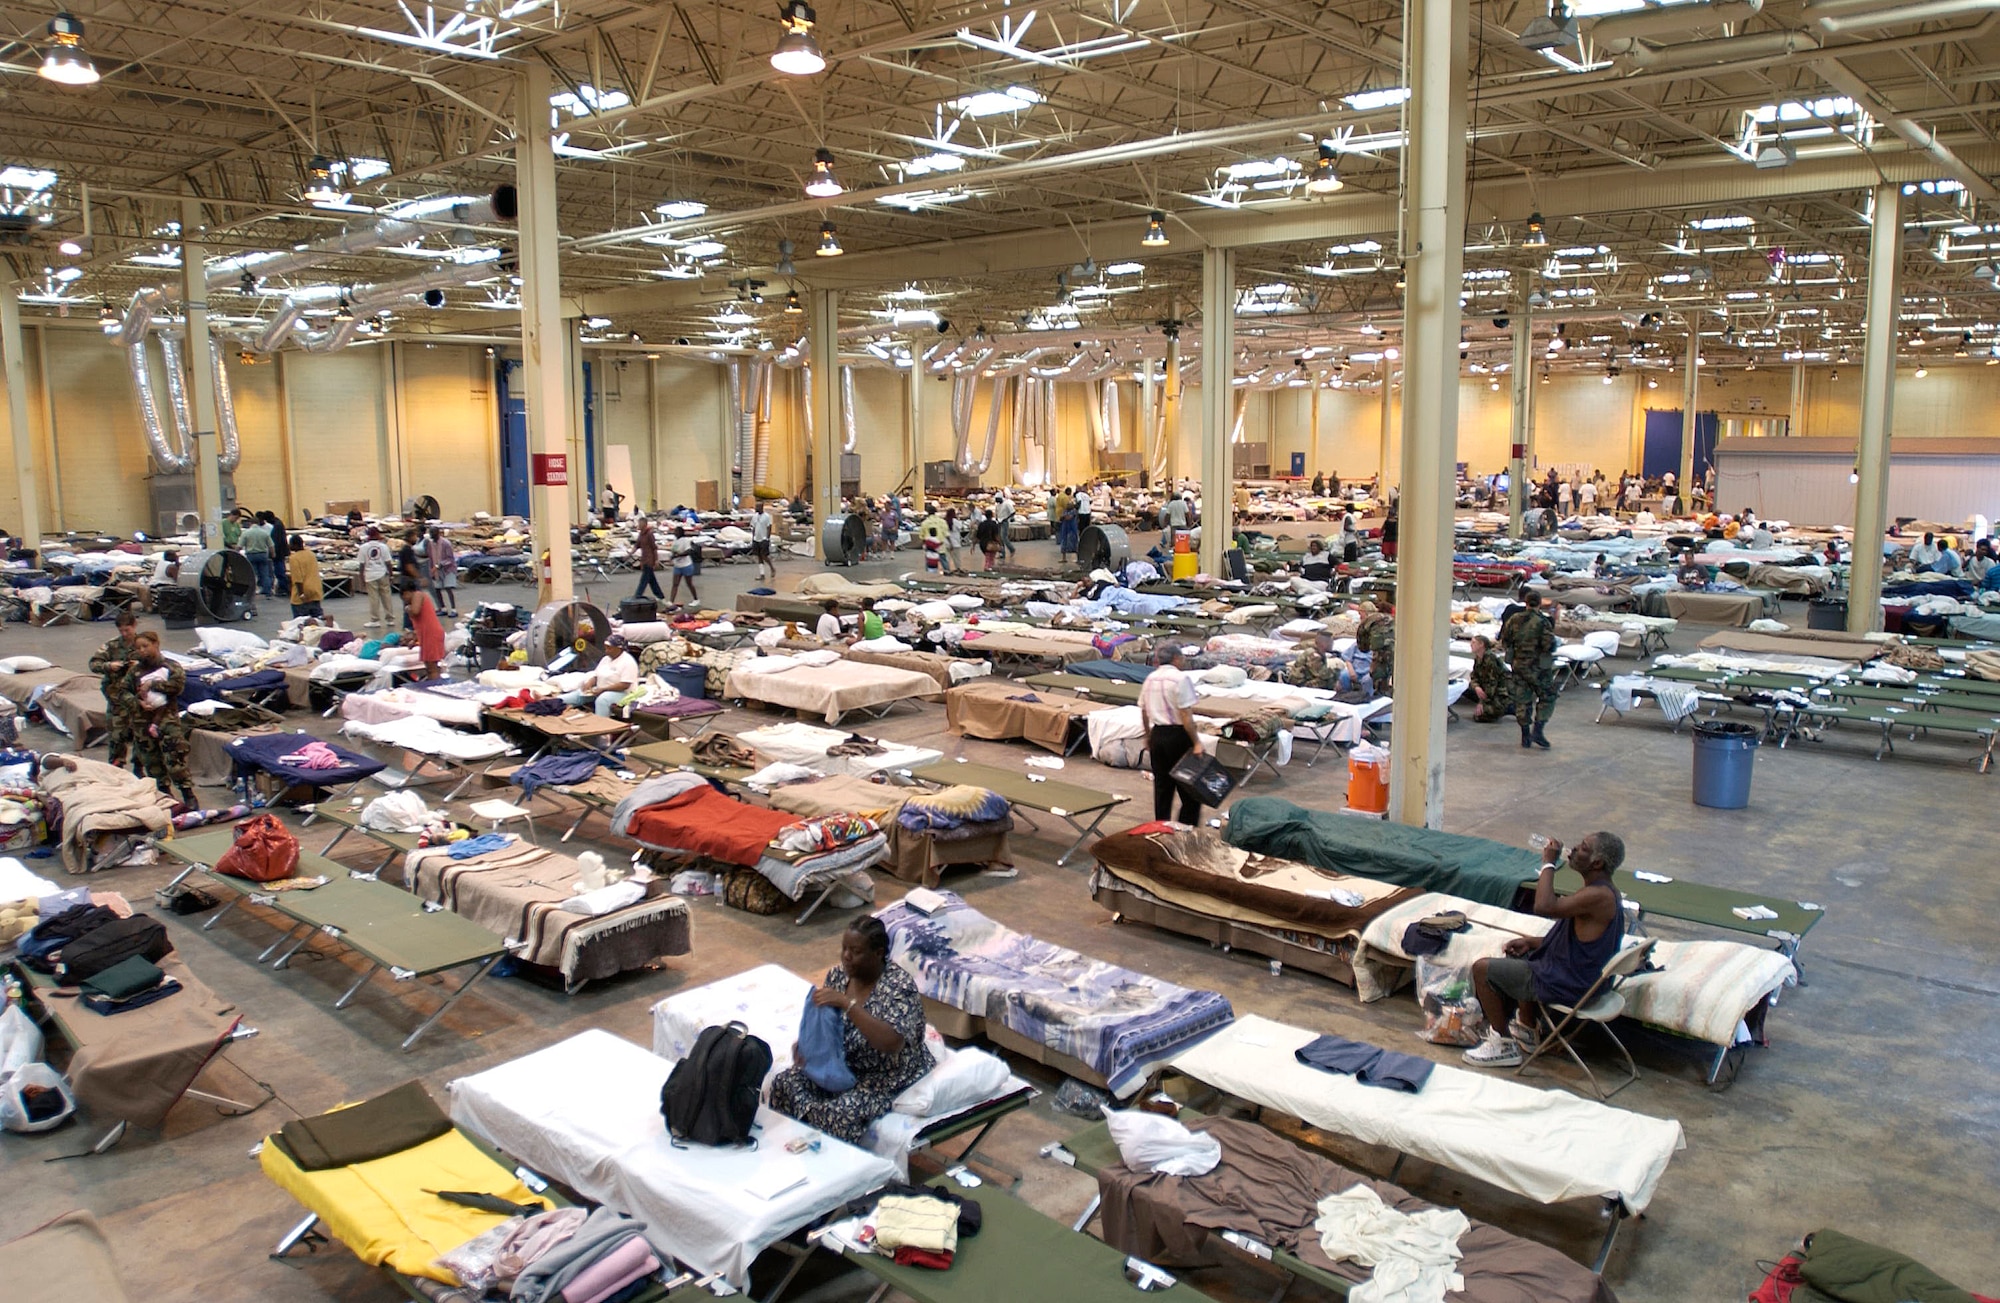 SAN ANTONIO - Gulf Coast evacuees relax on cots set up inside warehouses here converted to temporary shelters.  They were inprocessed, given a medical checkup, fed and provided donated clothing and other personal needs.  (U.S. Air Force photo by Tech. Sgt. Mark Borosch)